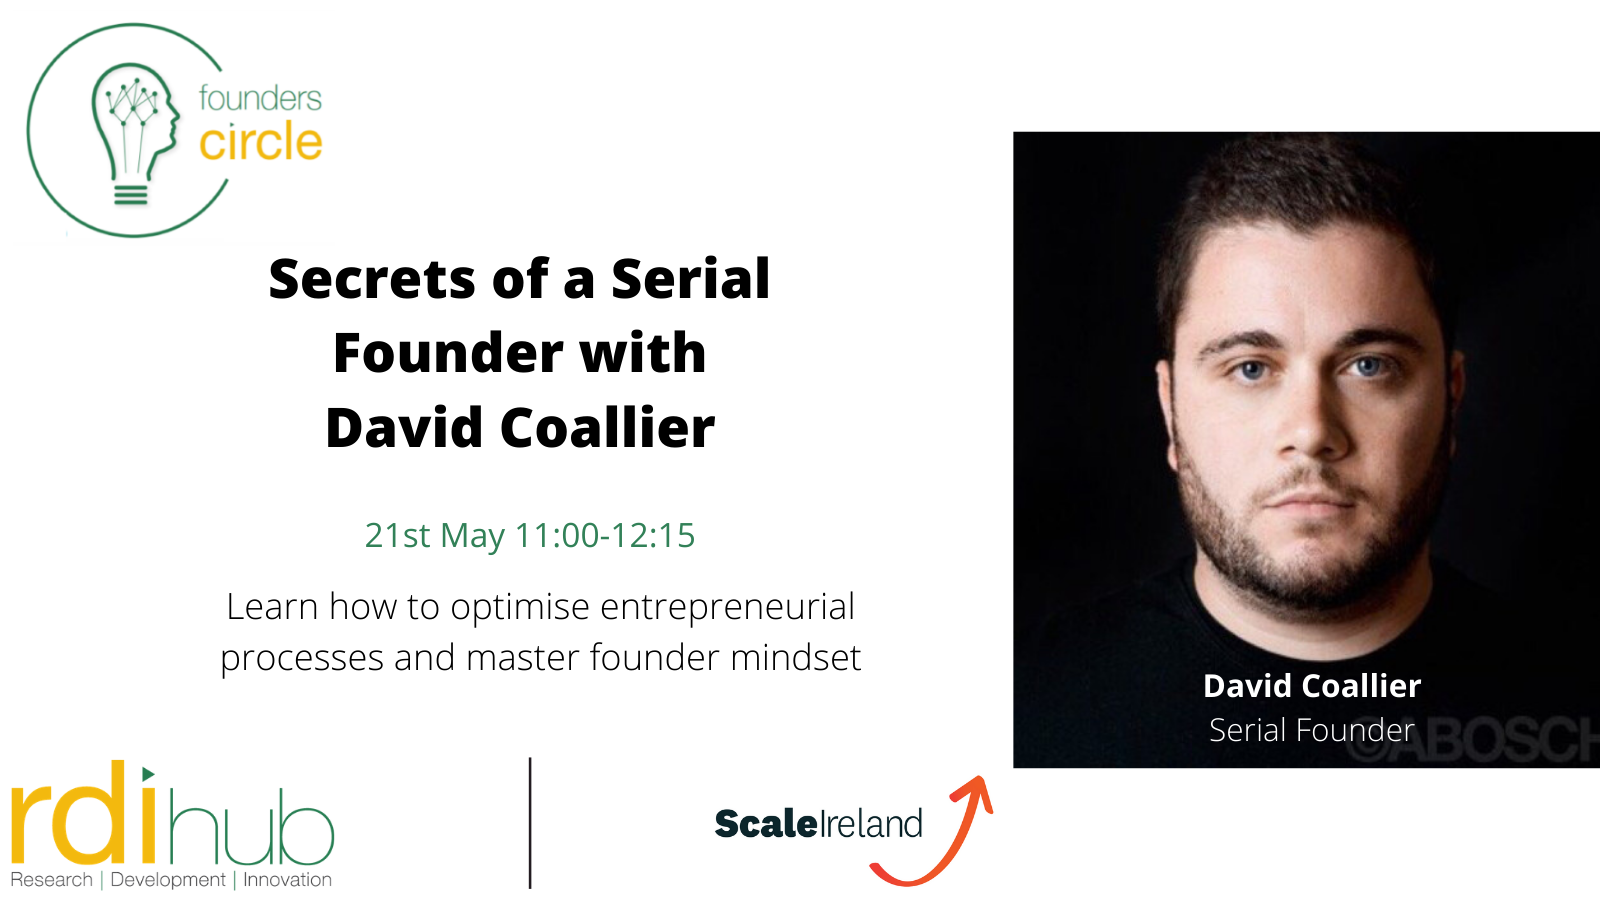 The Founders’ Circle: Secrets Of a Serial Founder with David Coallier